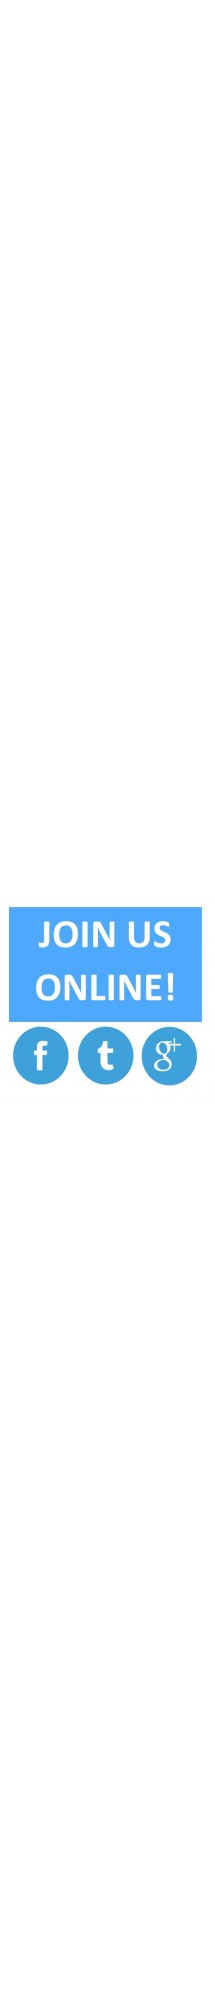 Join us online